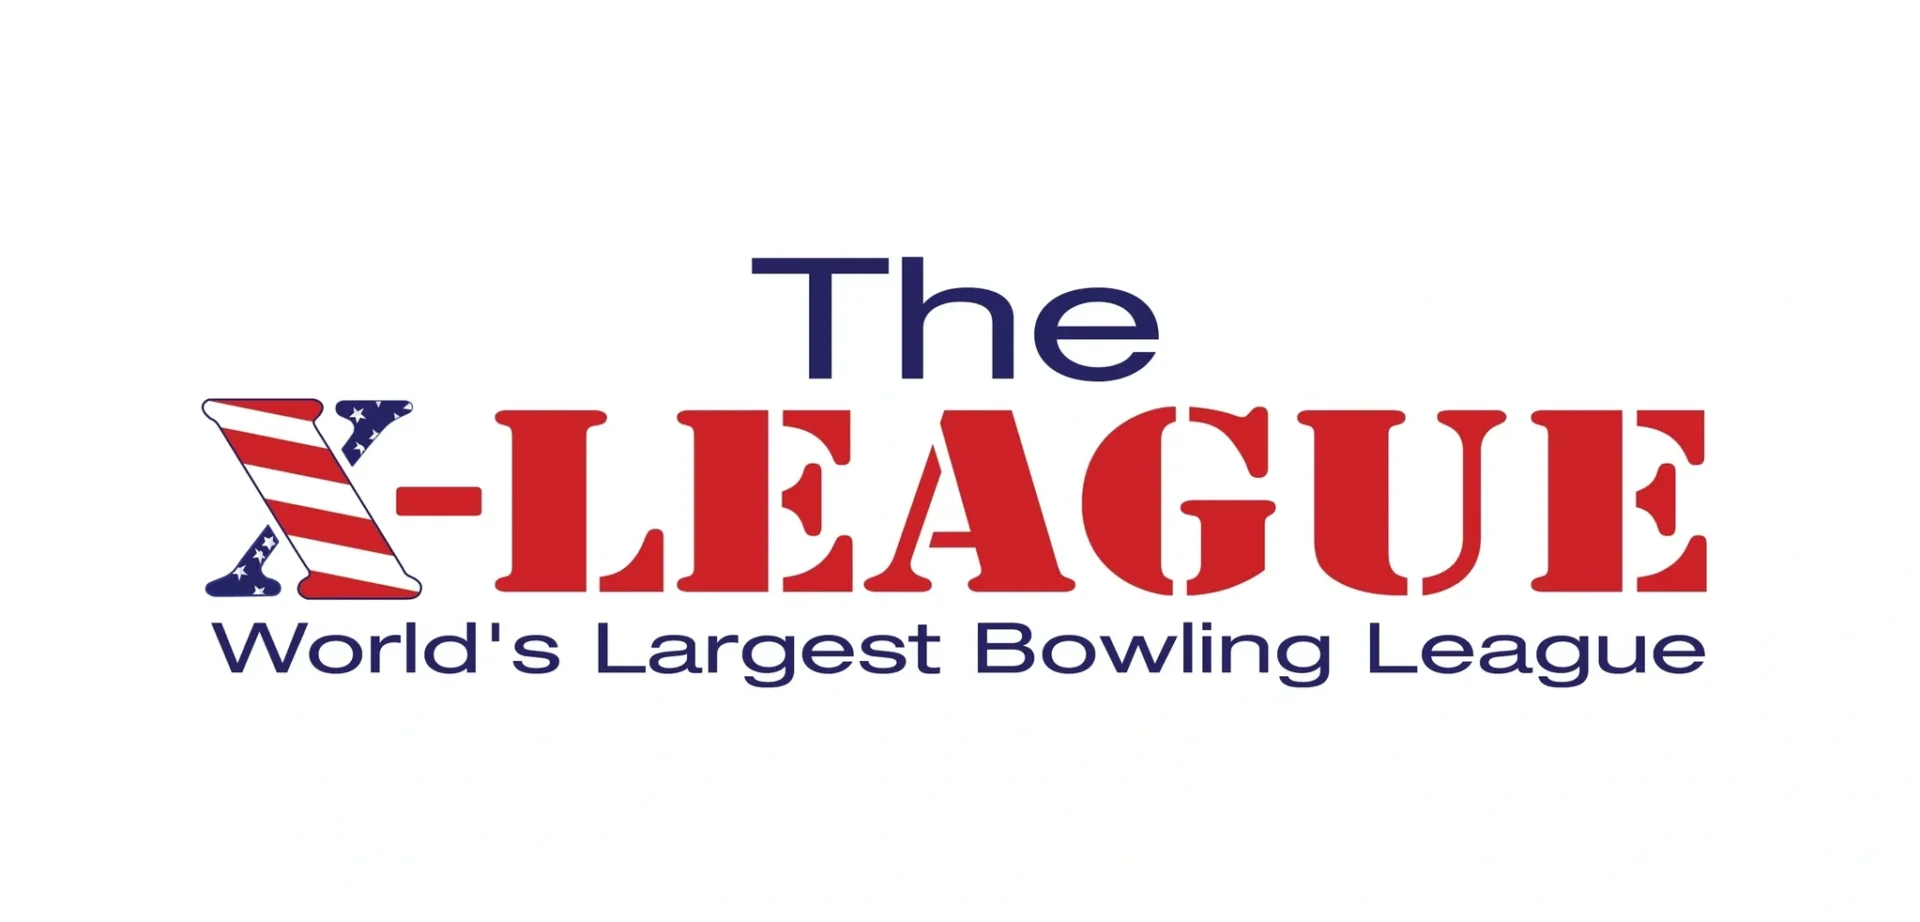 A logo of the league is shown.